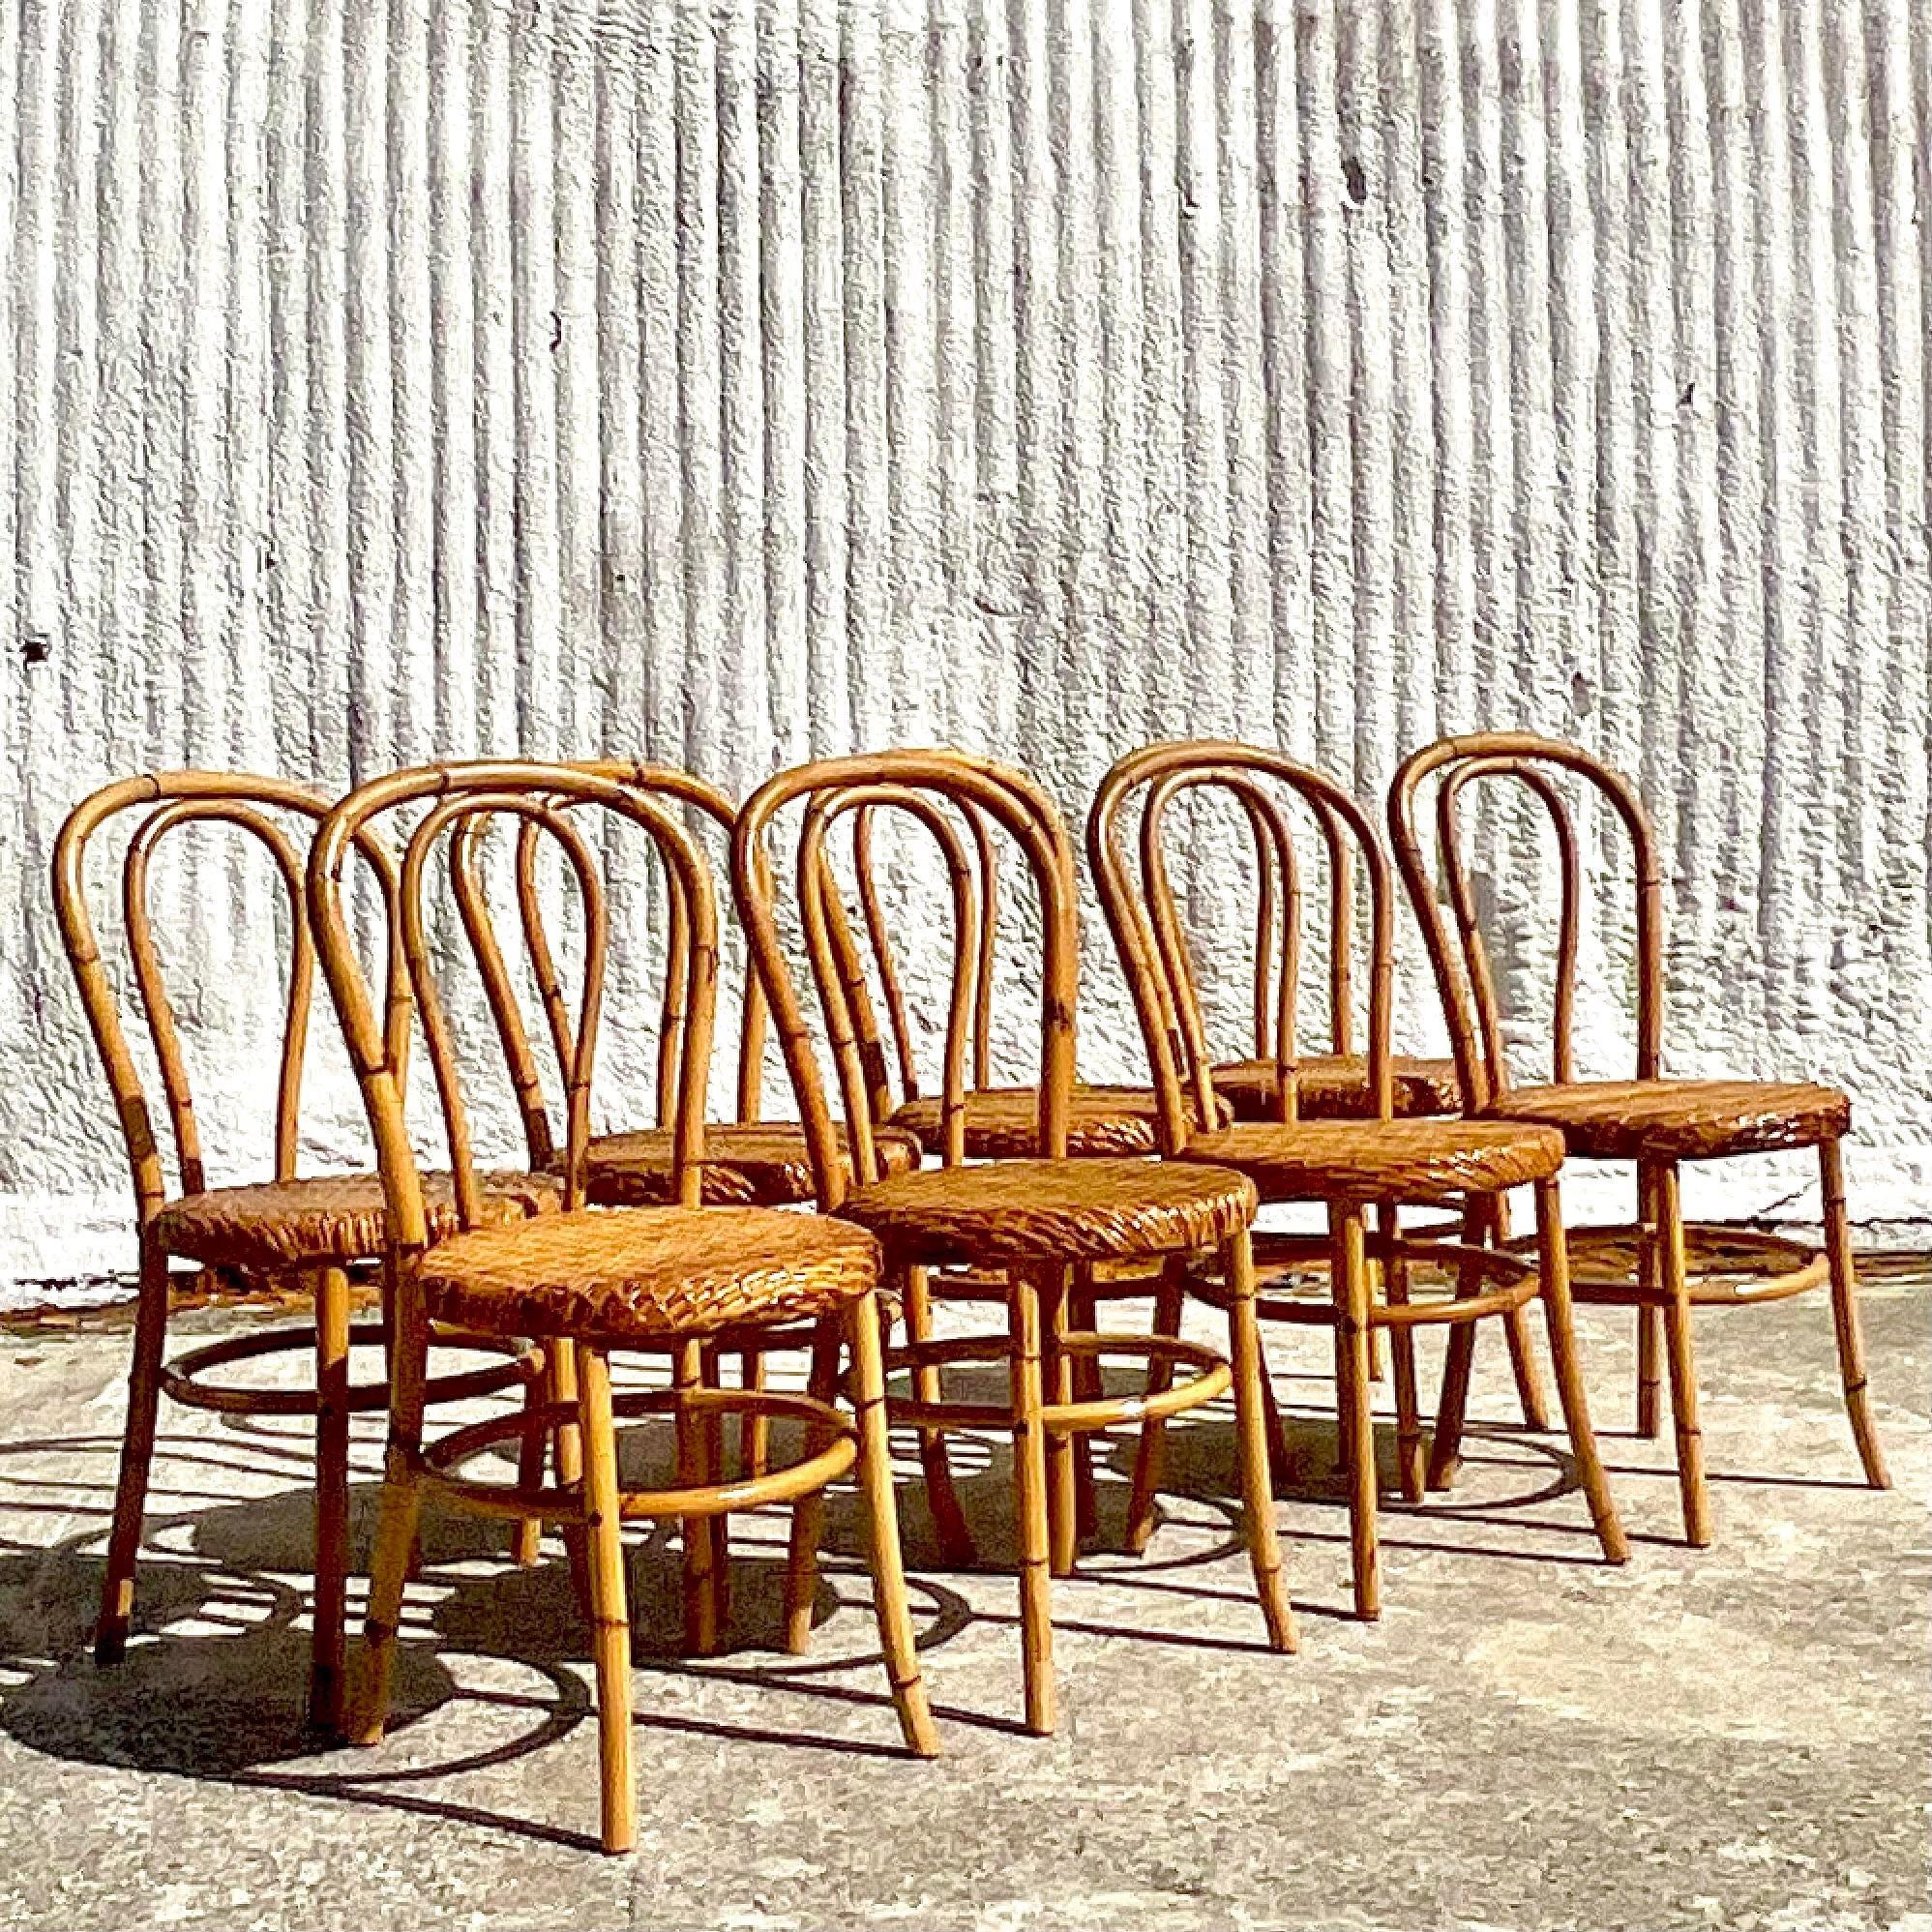 Vintage Coastal Rare McGuire Bent Bamboo Dining Chairs - Set of 8 For Sale 3